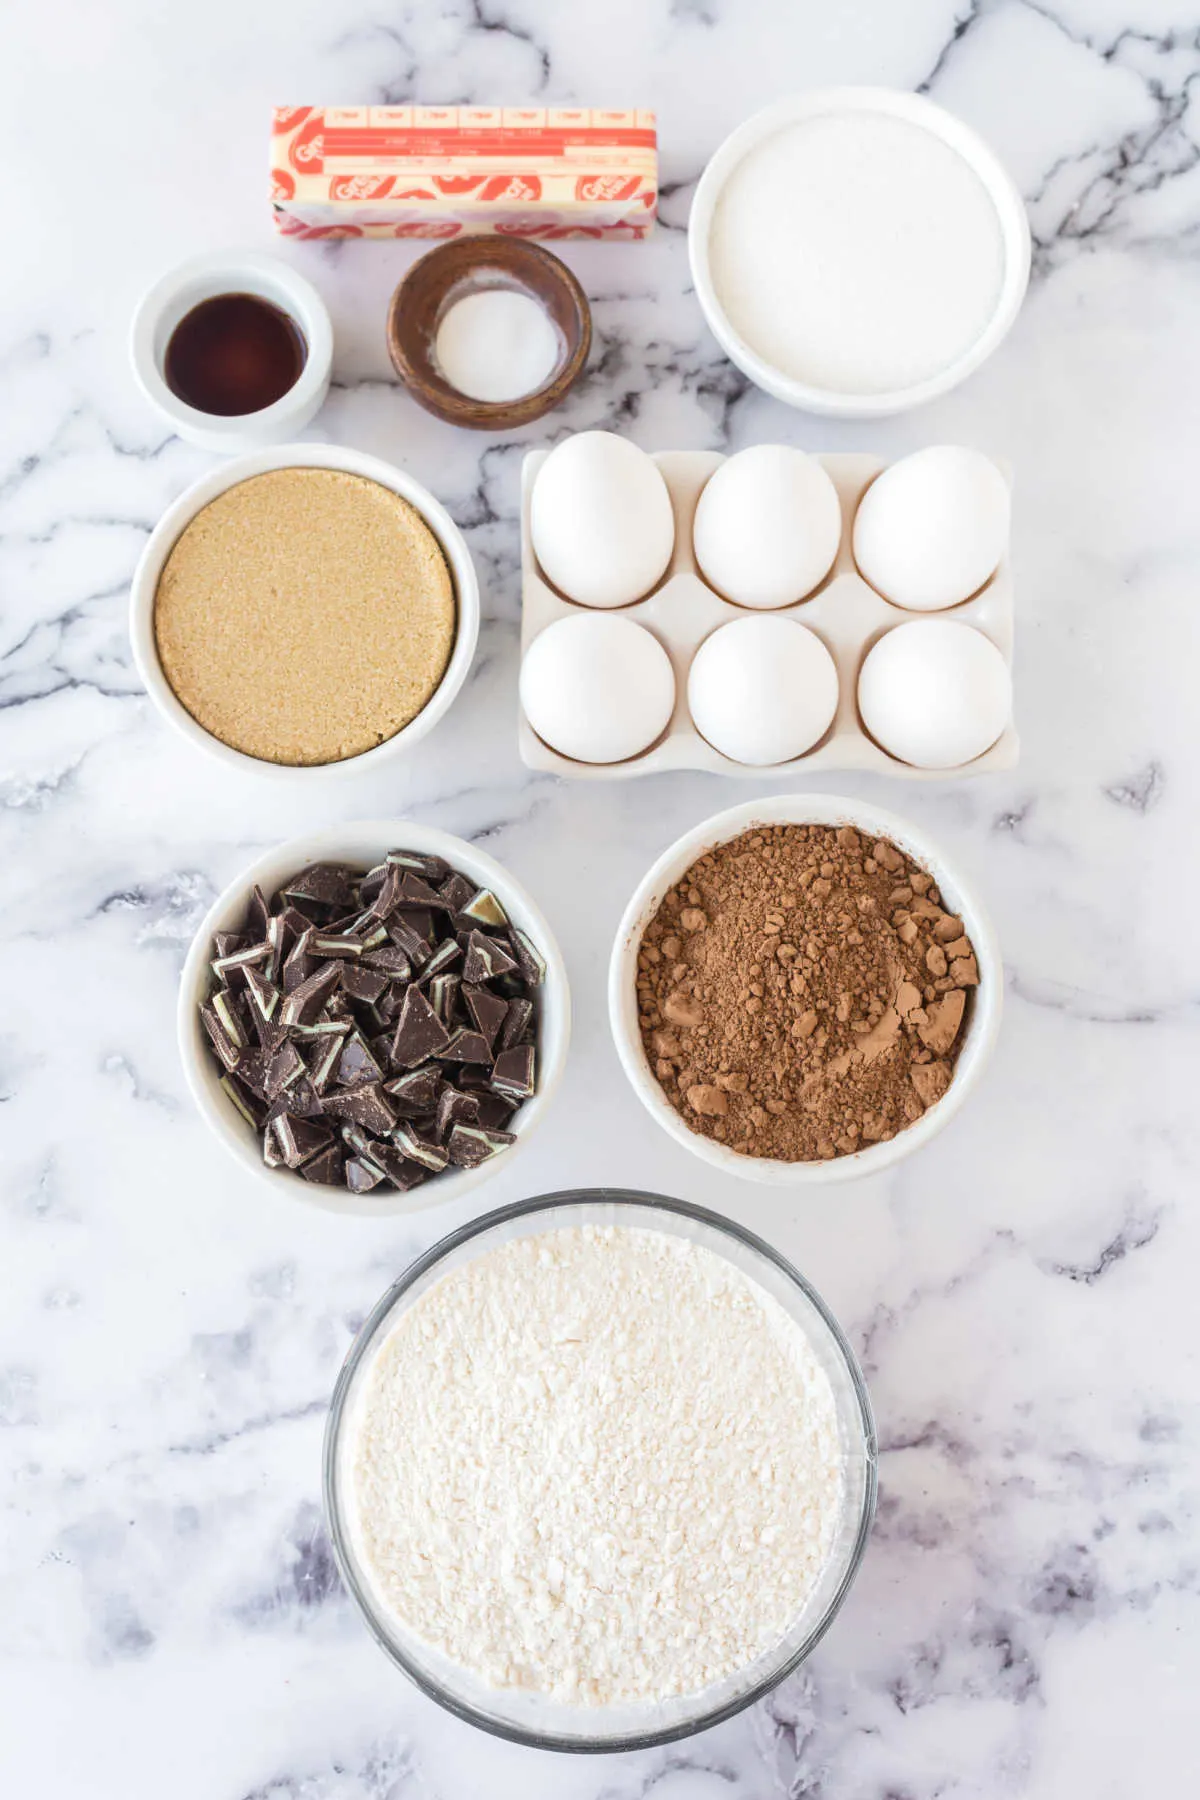 Ingredients including flour, sugar, brown sugar, cocoa powder, eggs, butter, vanilla, baking soda, and chopped Andes mints.